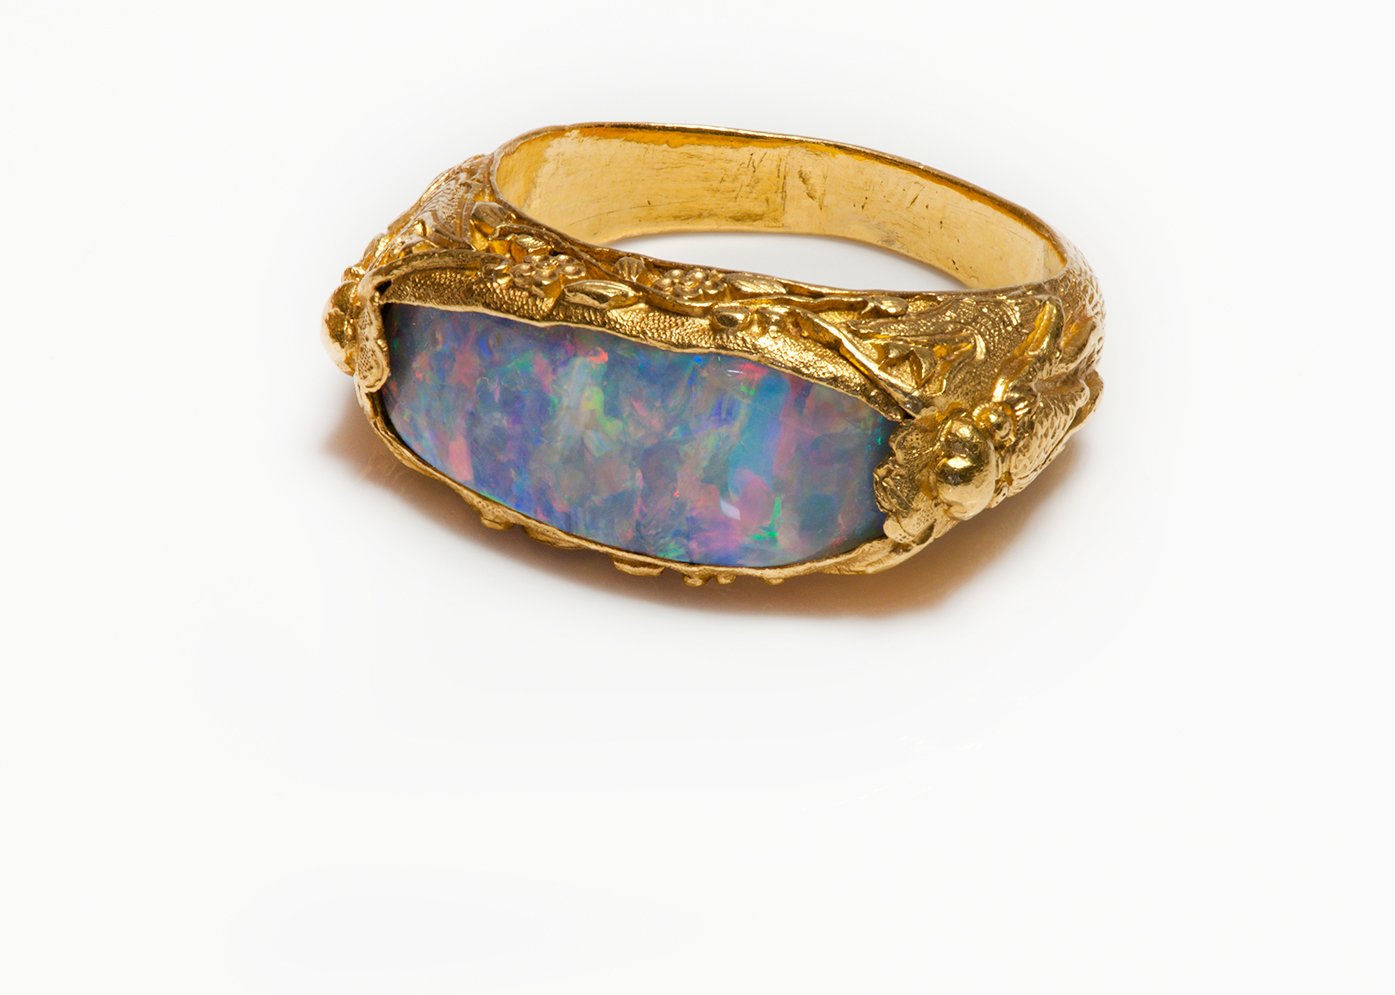 Opal, The Stone of Luck And Love. How to Match it with an Outfit - DSF Antique Jewelry